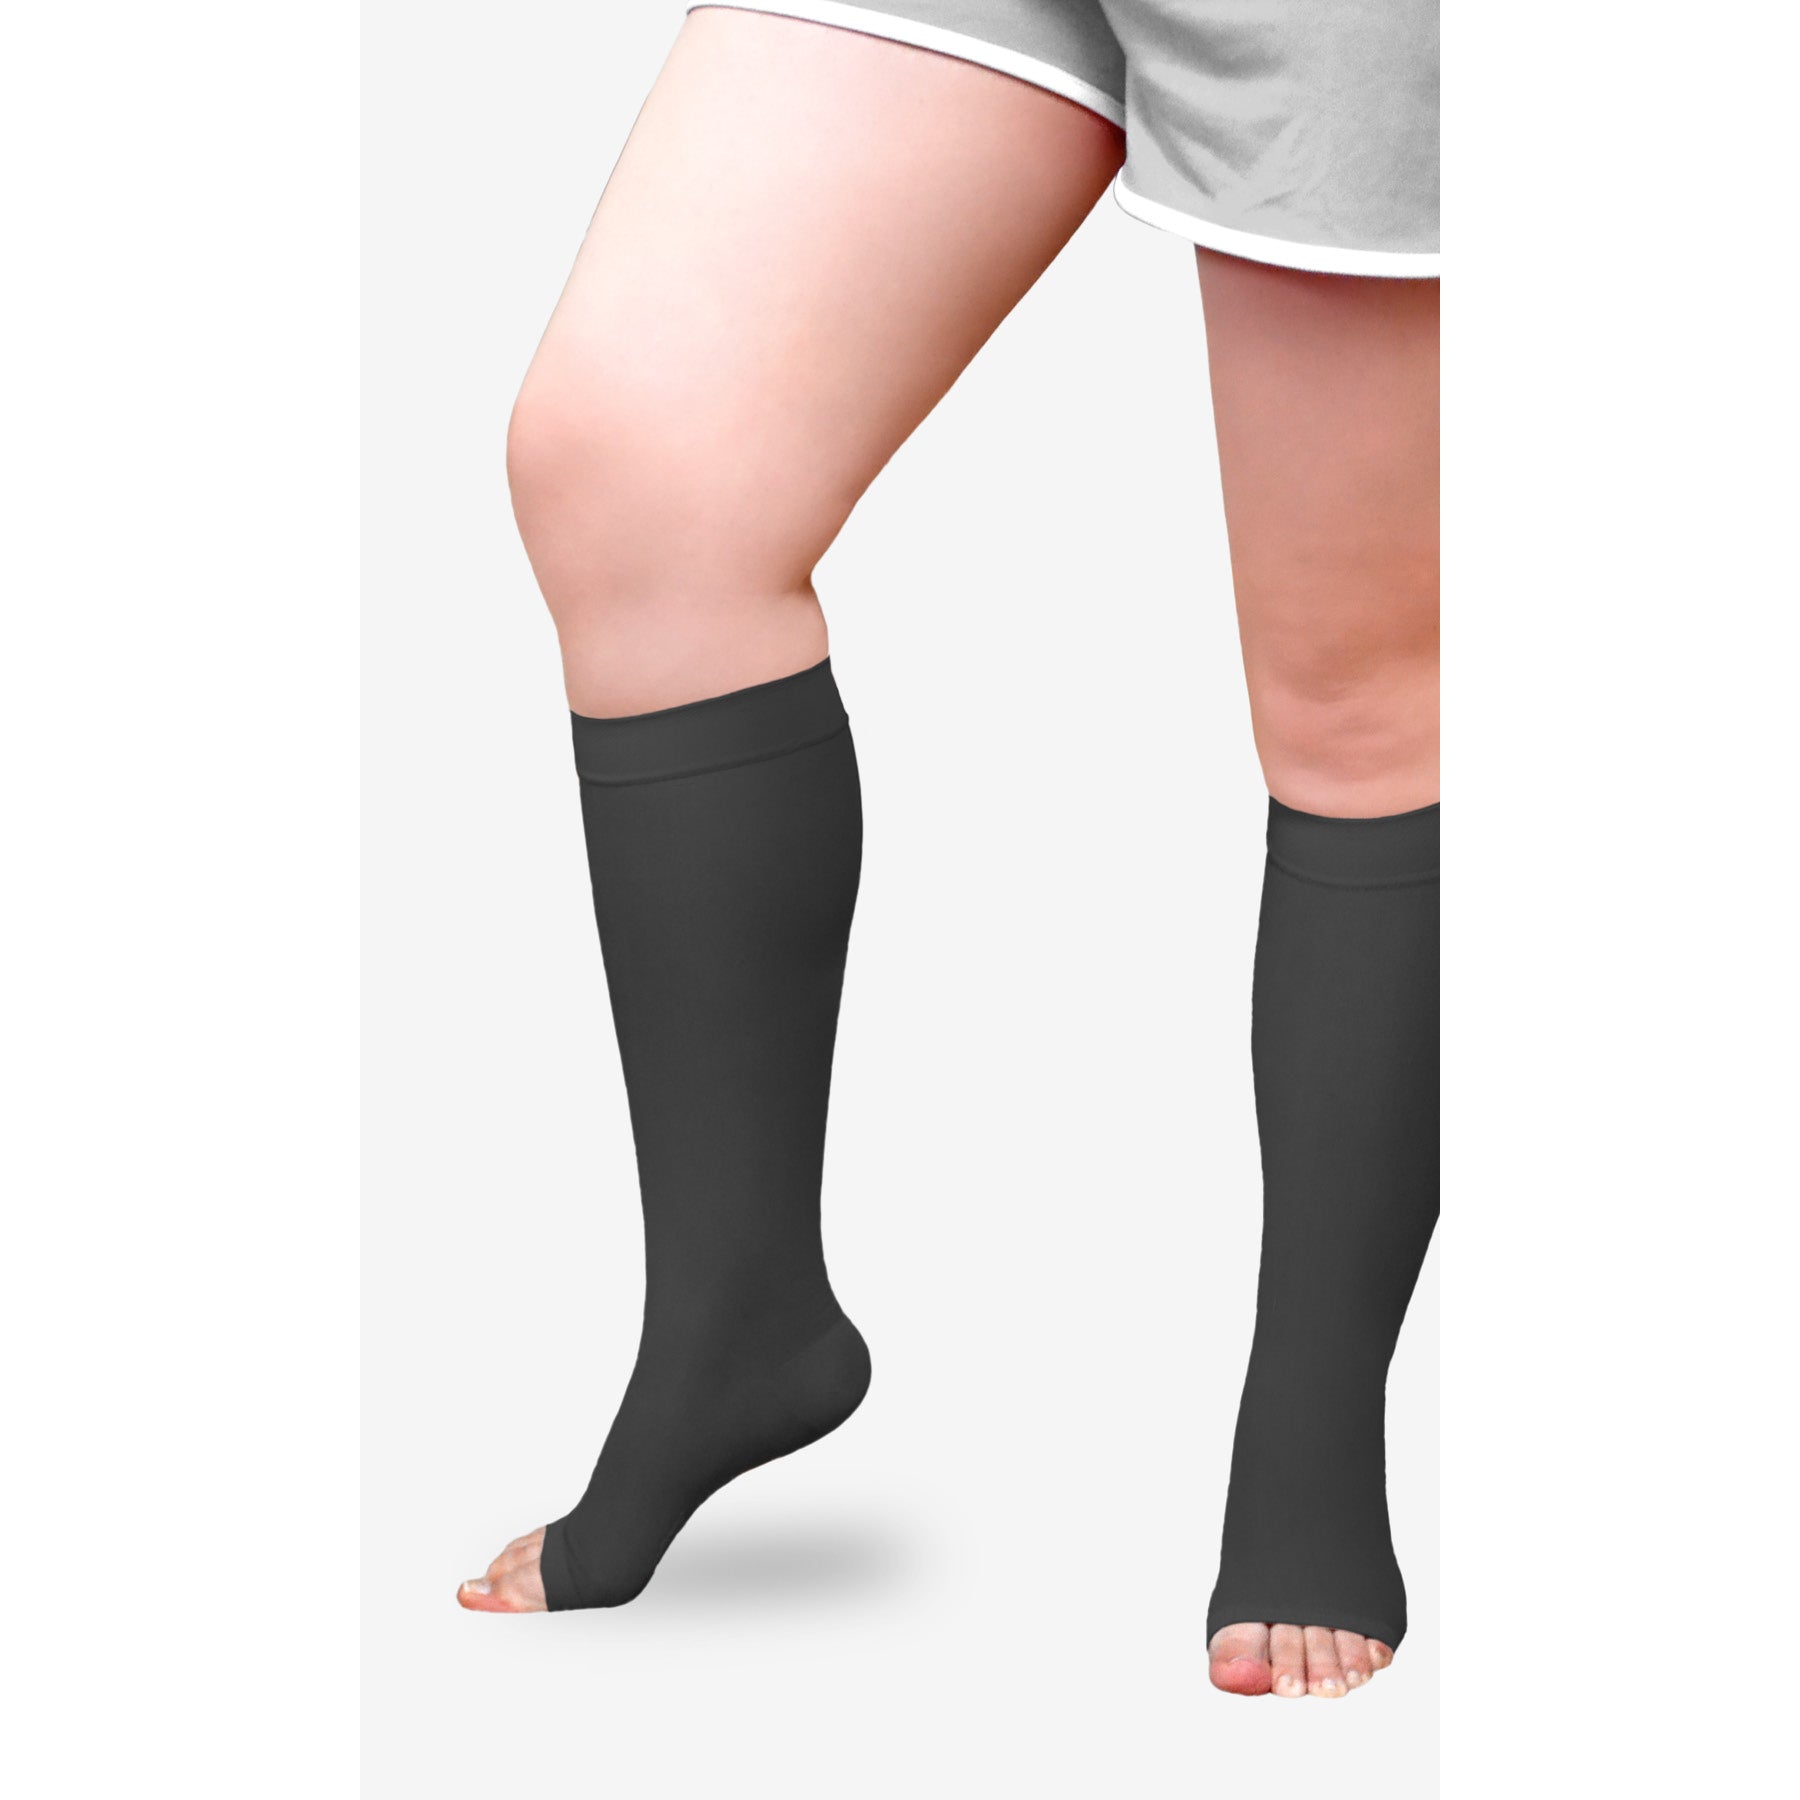 Solaris ExoStrong Thigh-High Stockings